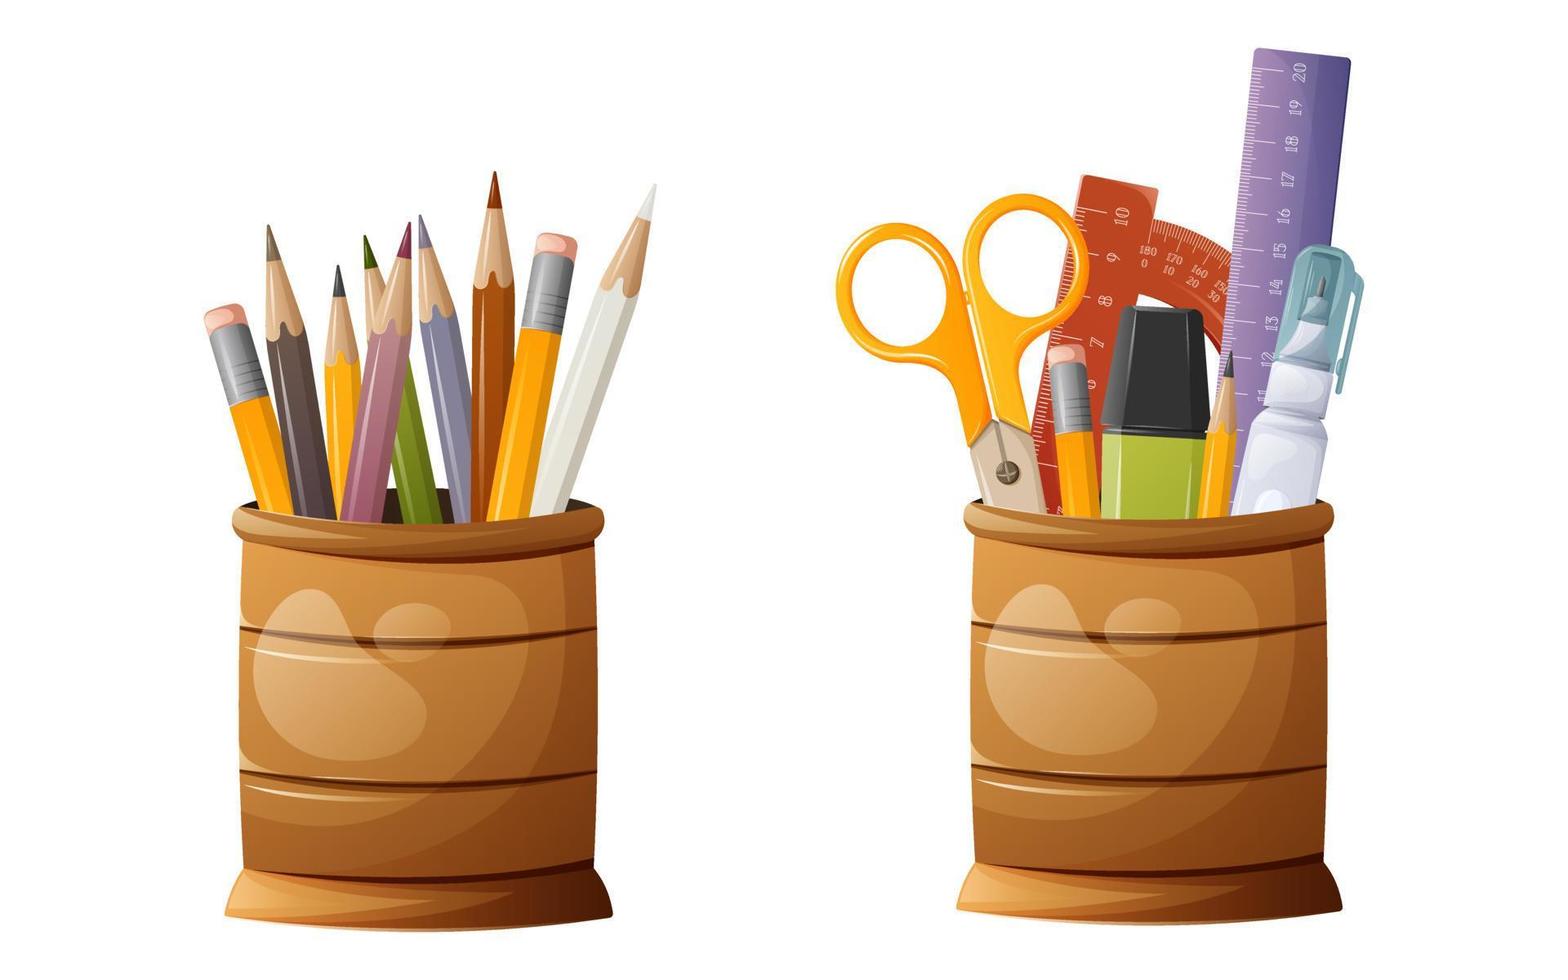 Set of desktop stands with stationery. Colored pencils, scissors, various rulers, corrector and marker. Vector illustration. School, education concept